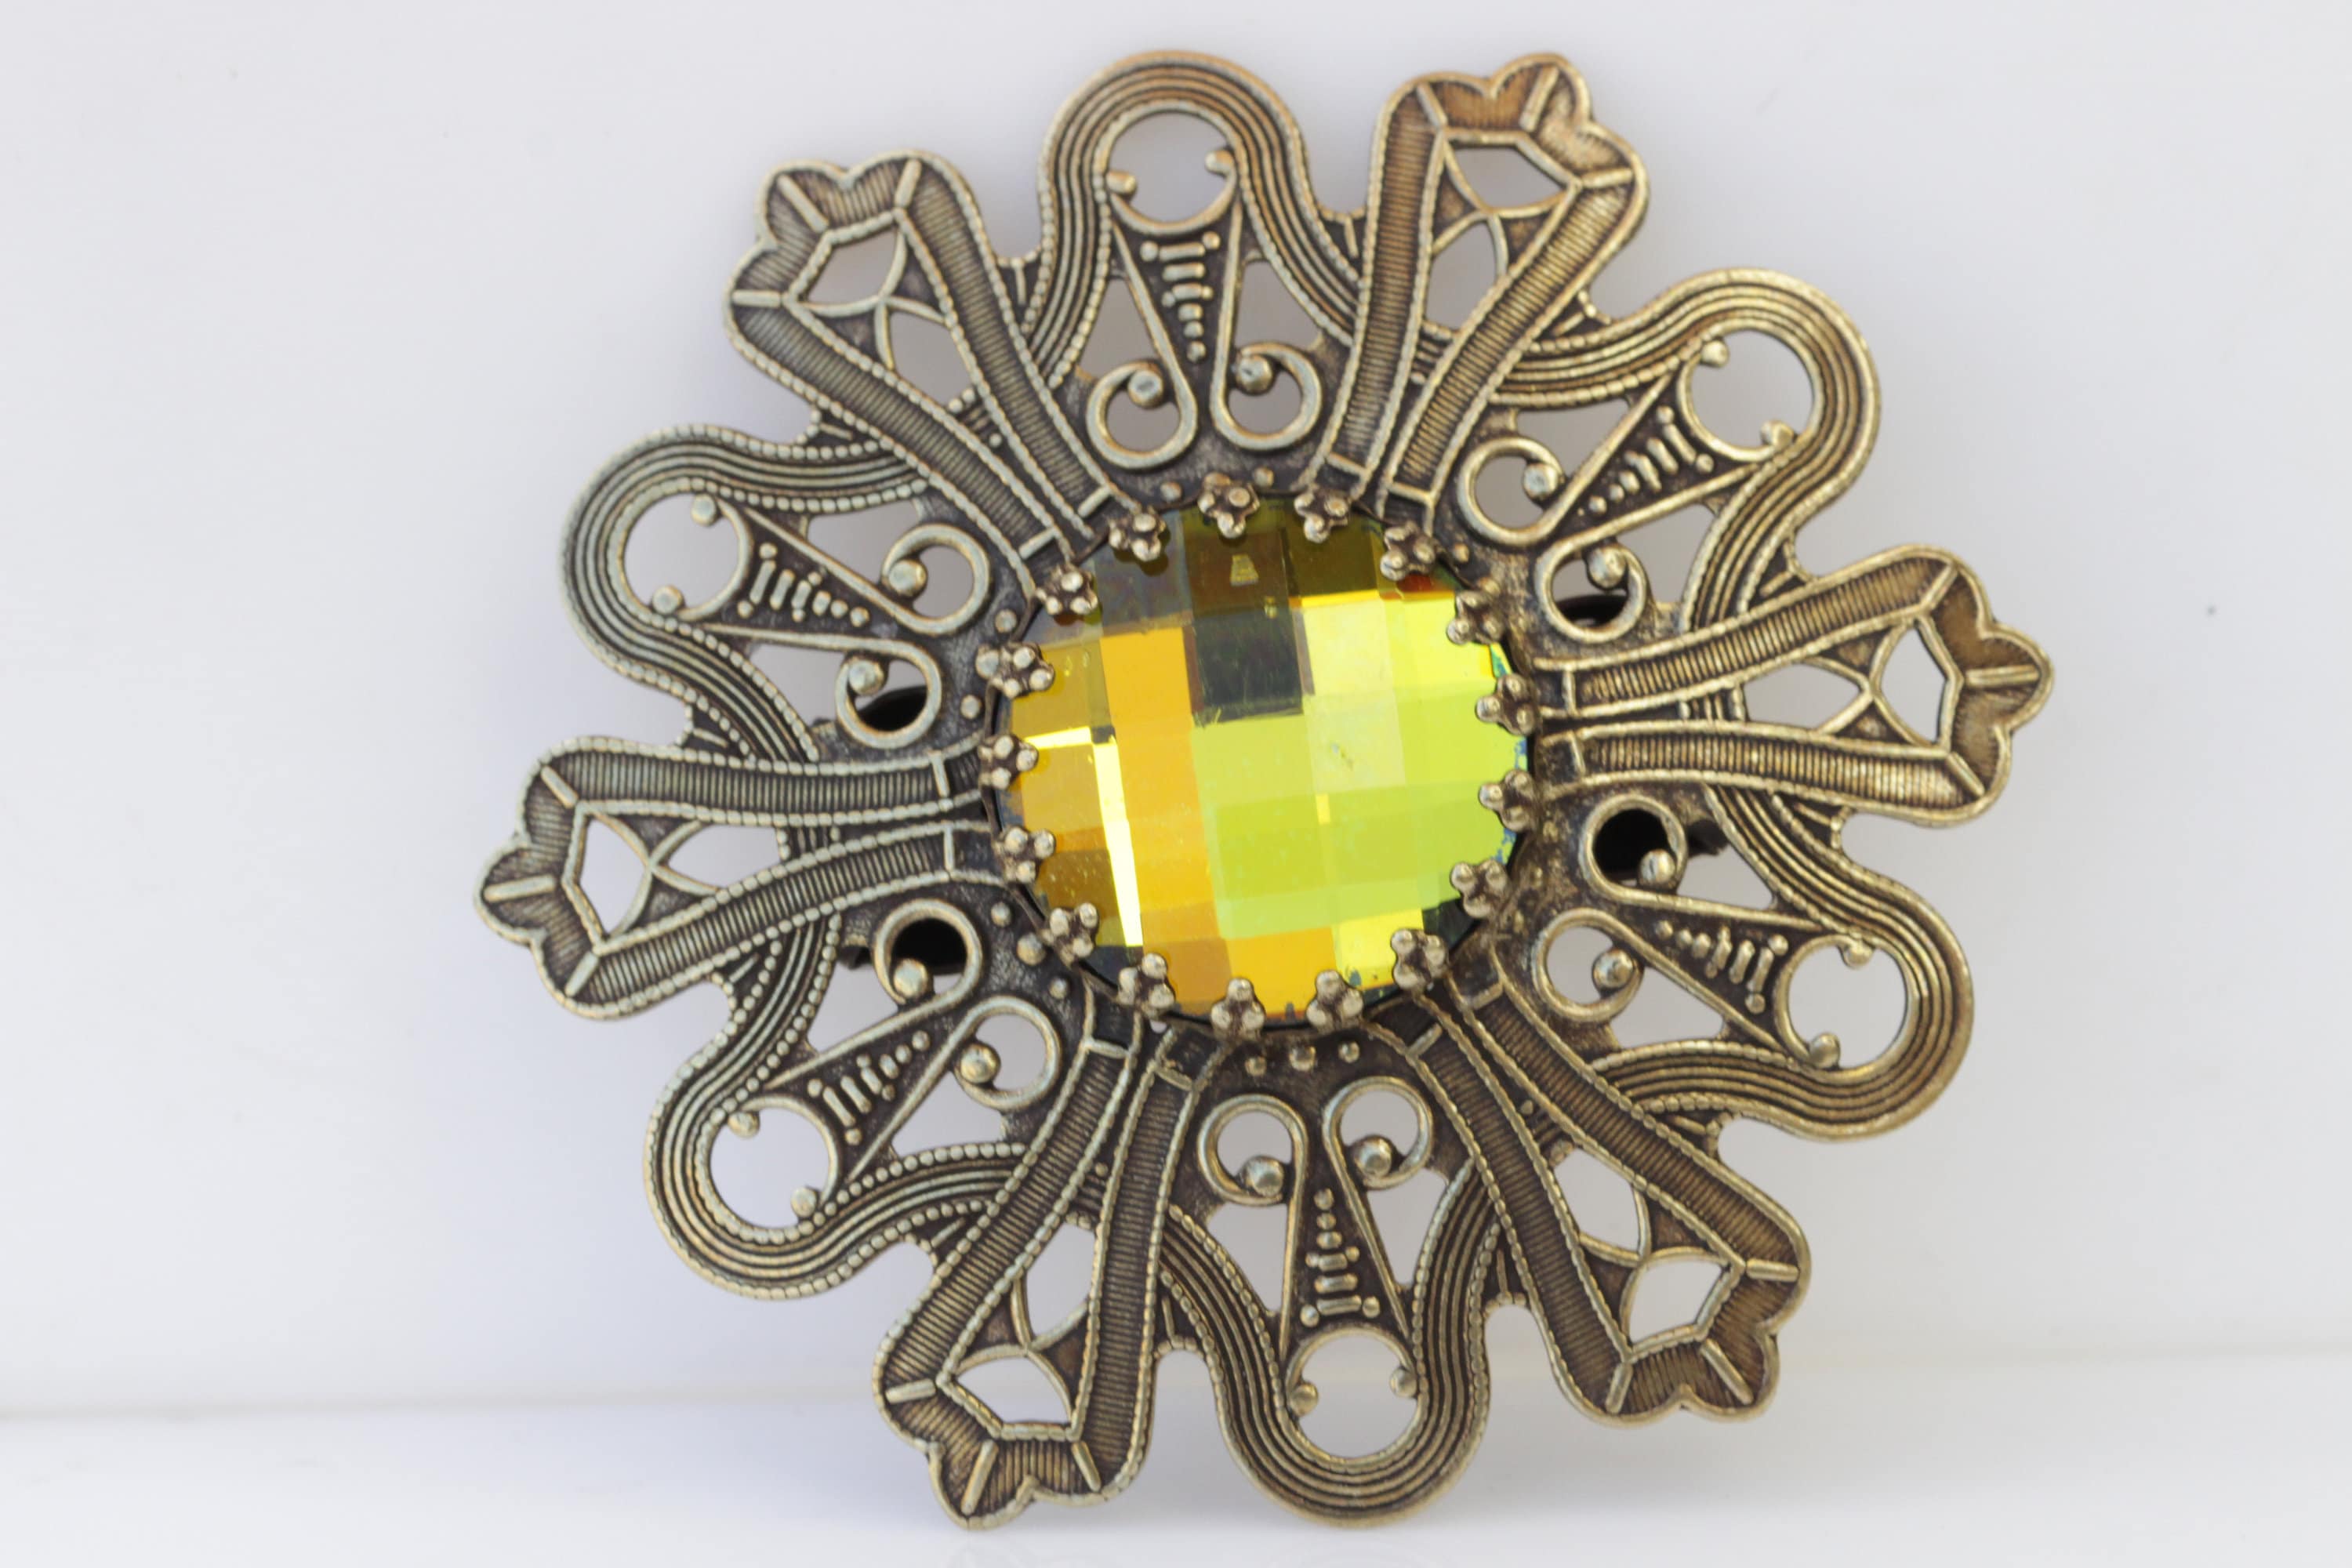 rebekajewelry Yellow Green Brooch, Brass Brooch, Flower Vintage Brooch, Unique Brooch, Antique Clothing Brooch, Coat Pin, Gift for Her, Brooch for Dress